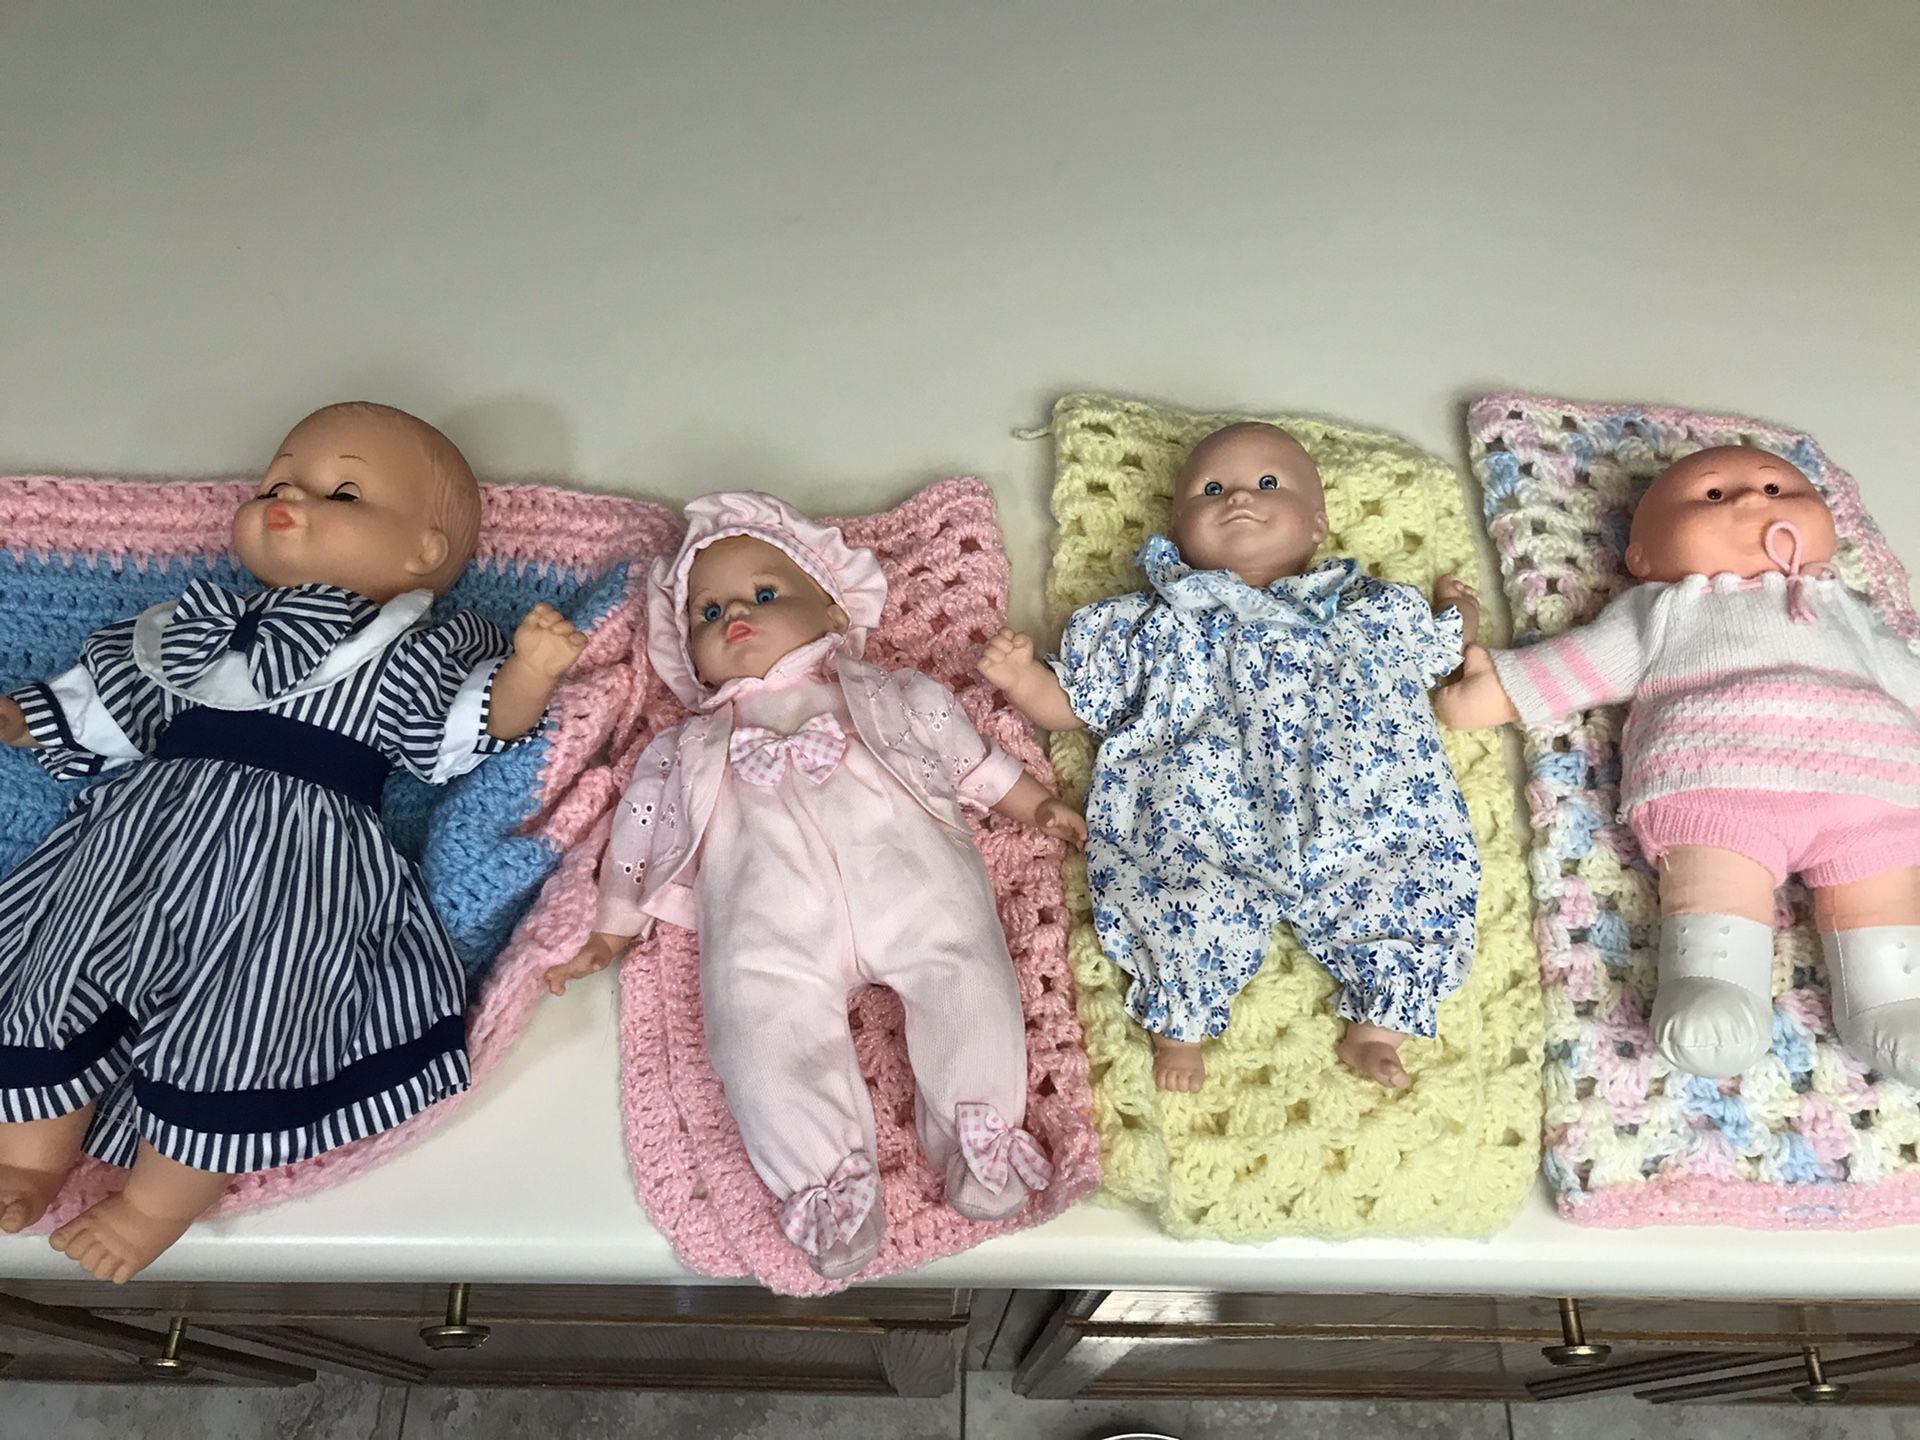 Classic Baby Dolls with knitted blankets